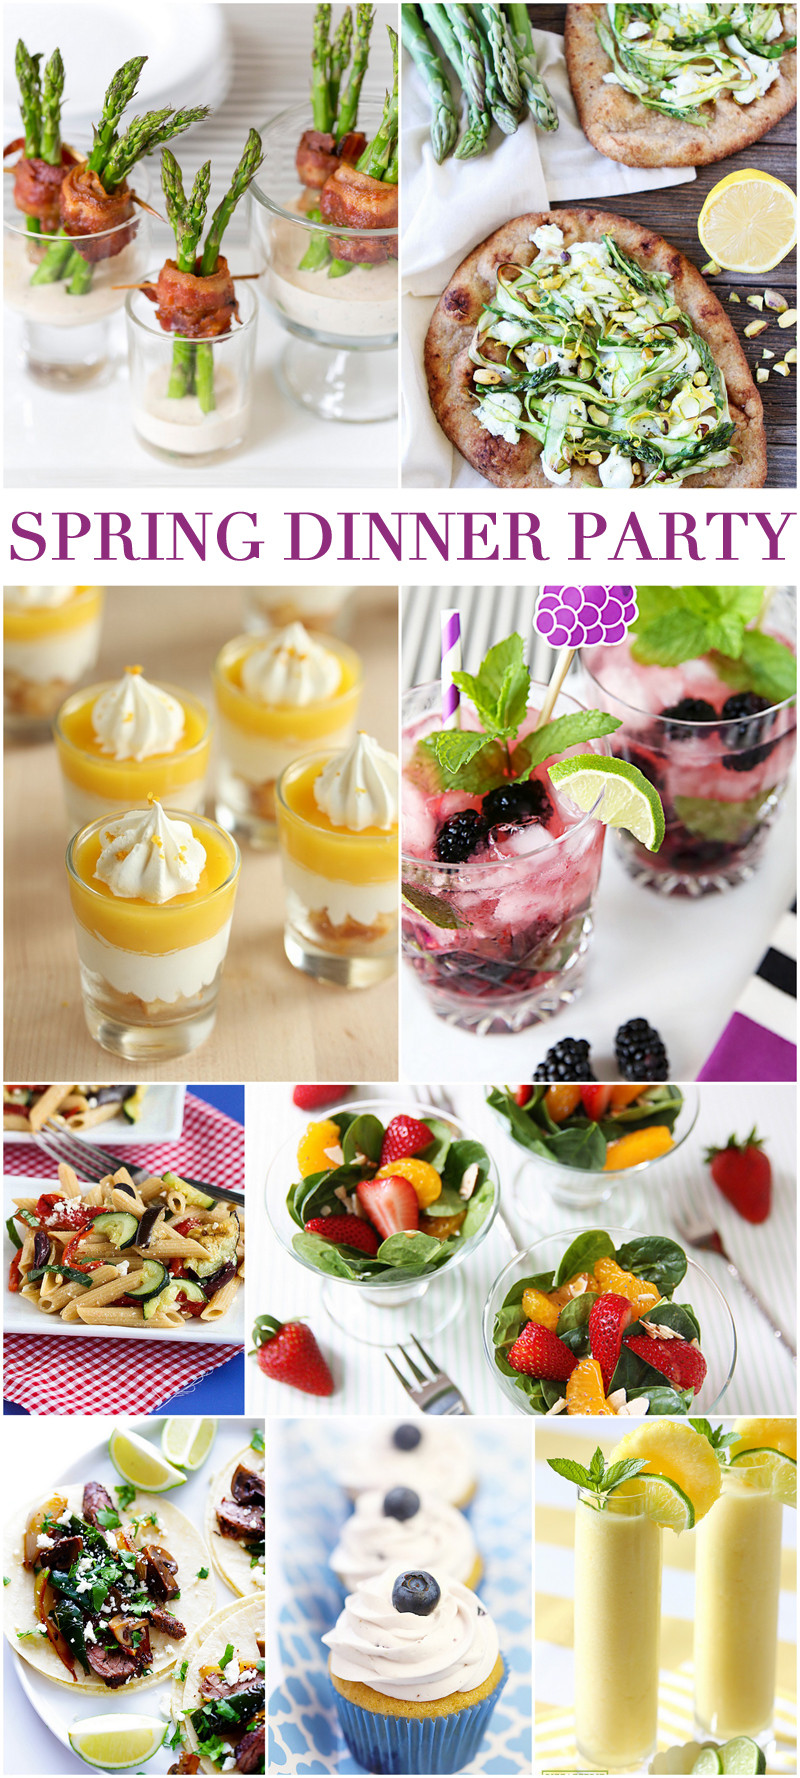 Dinner Party Menu Ideas
 Host a Spring Dinner Party in Style